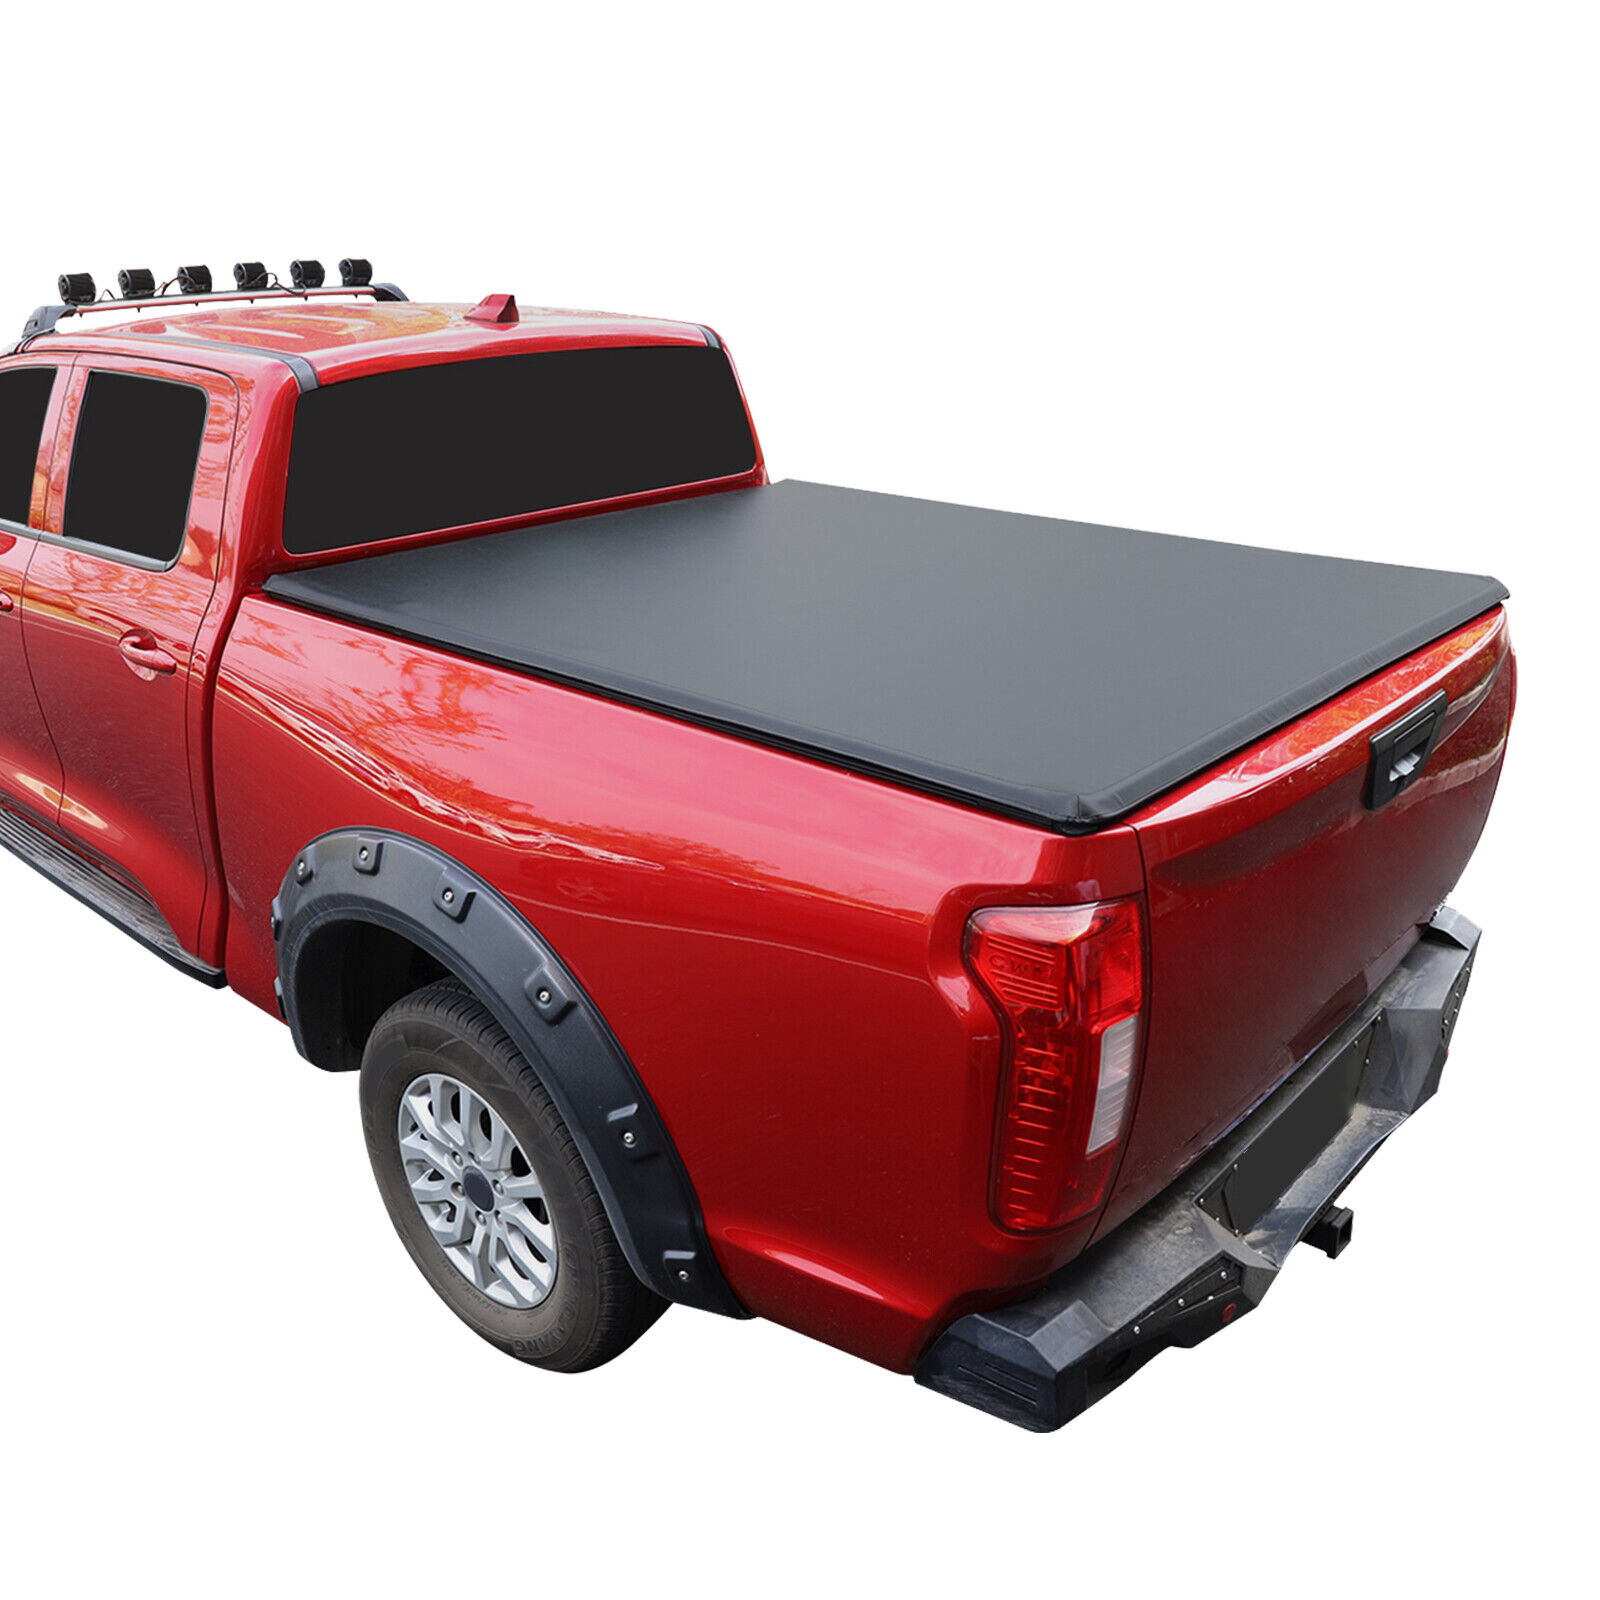 Soft Roll Up Tonneau Cover for 2007-2013 Toyota Tundra Bed Length 5.5ft Black